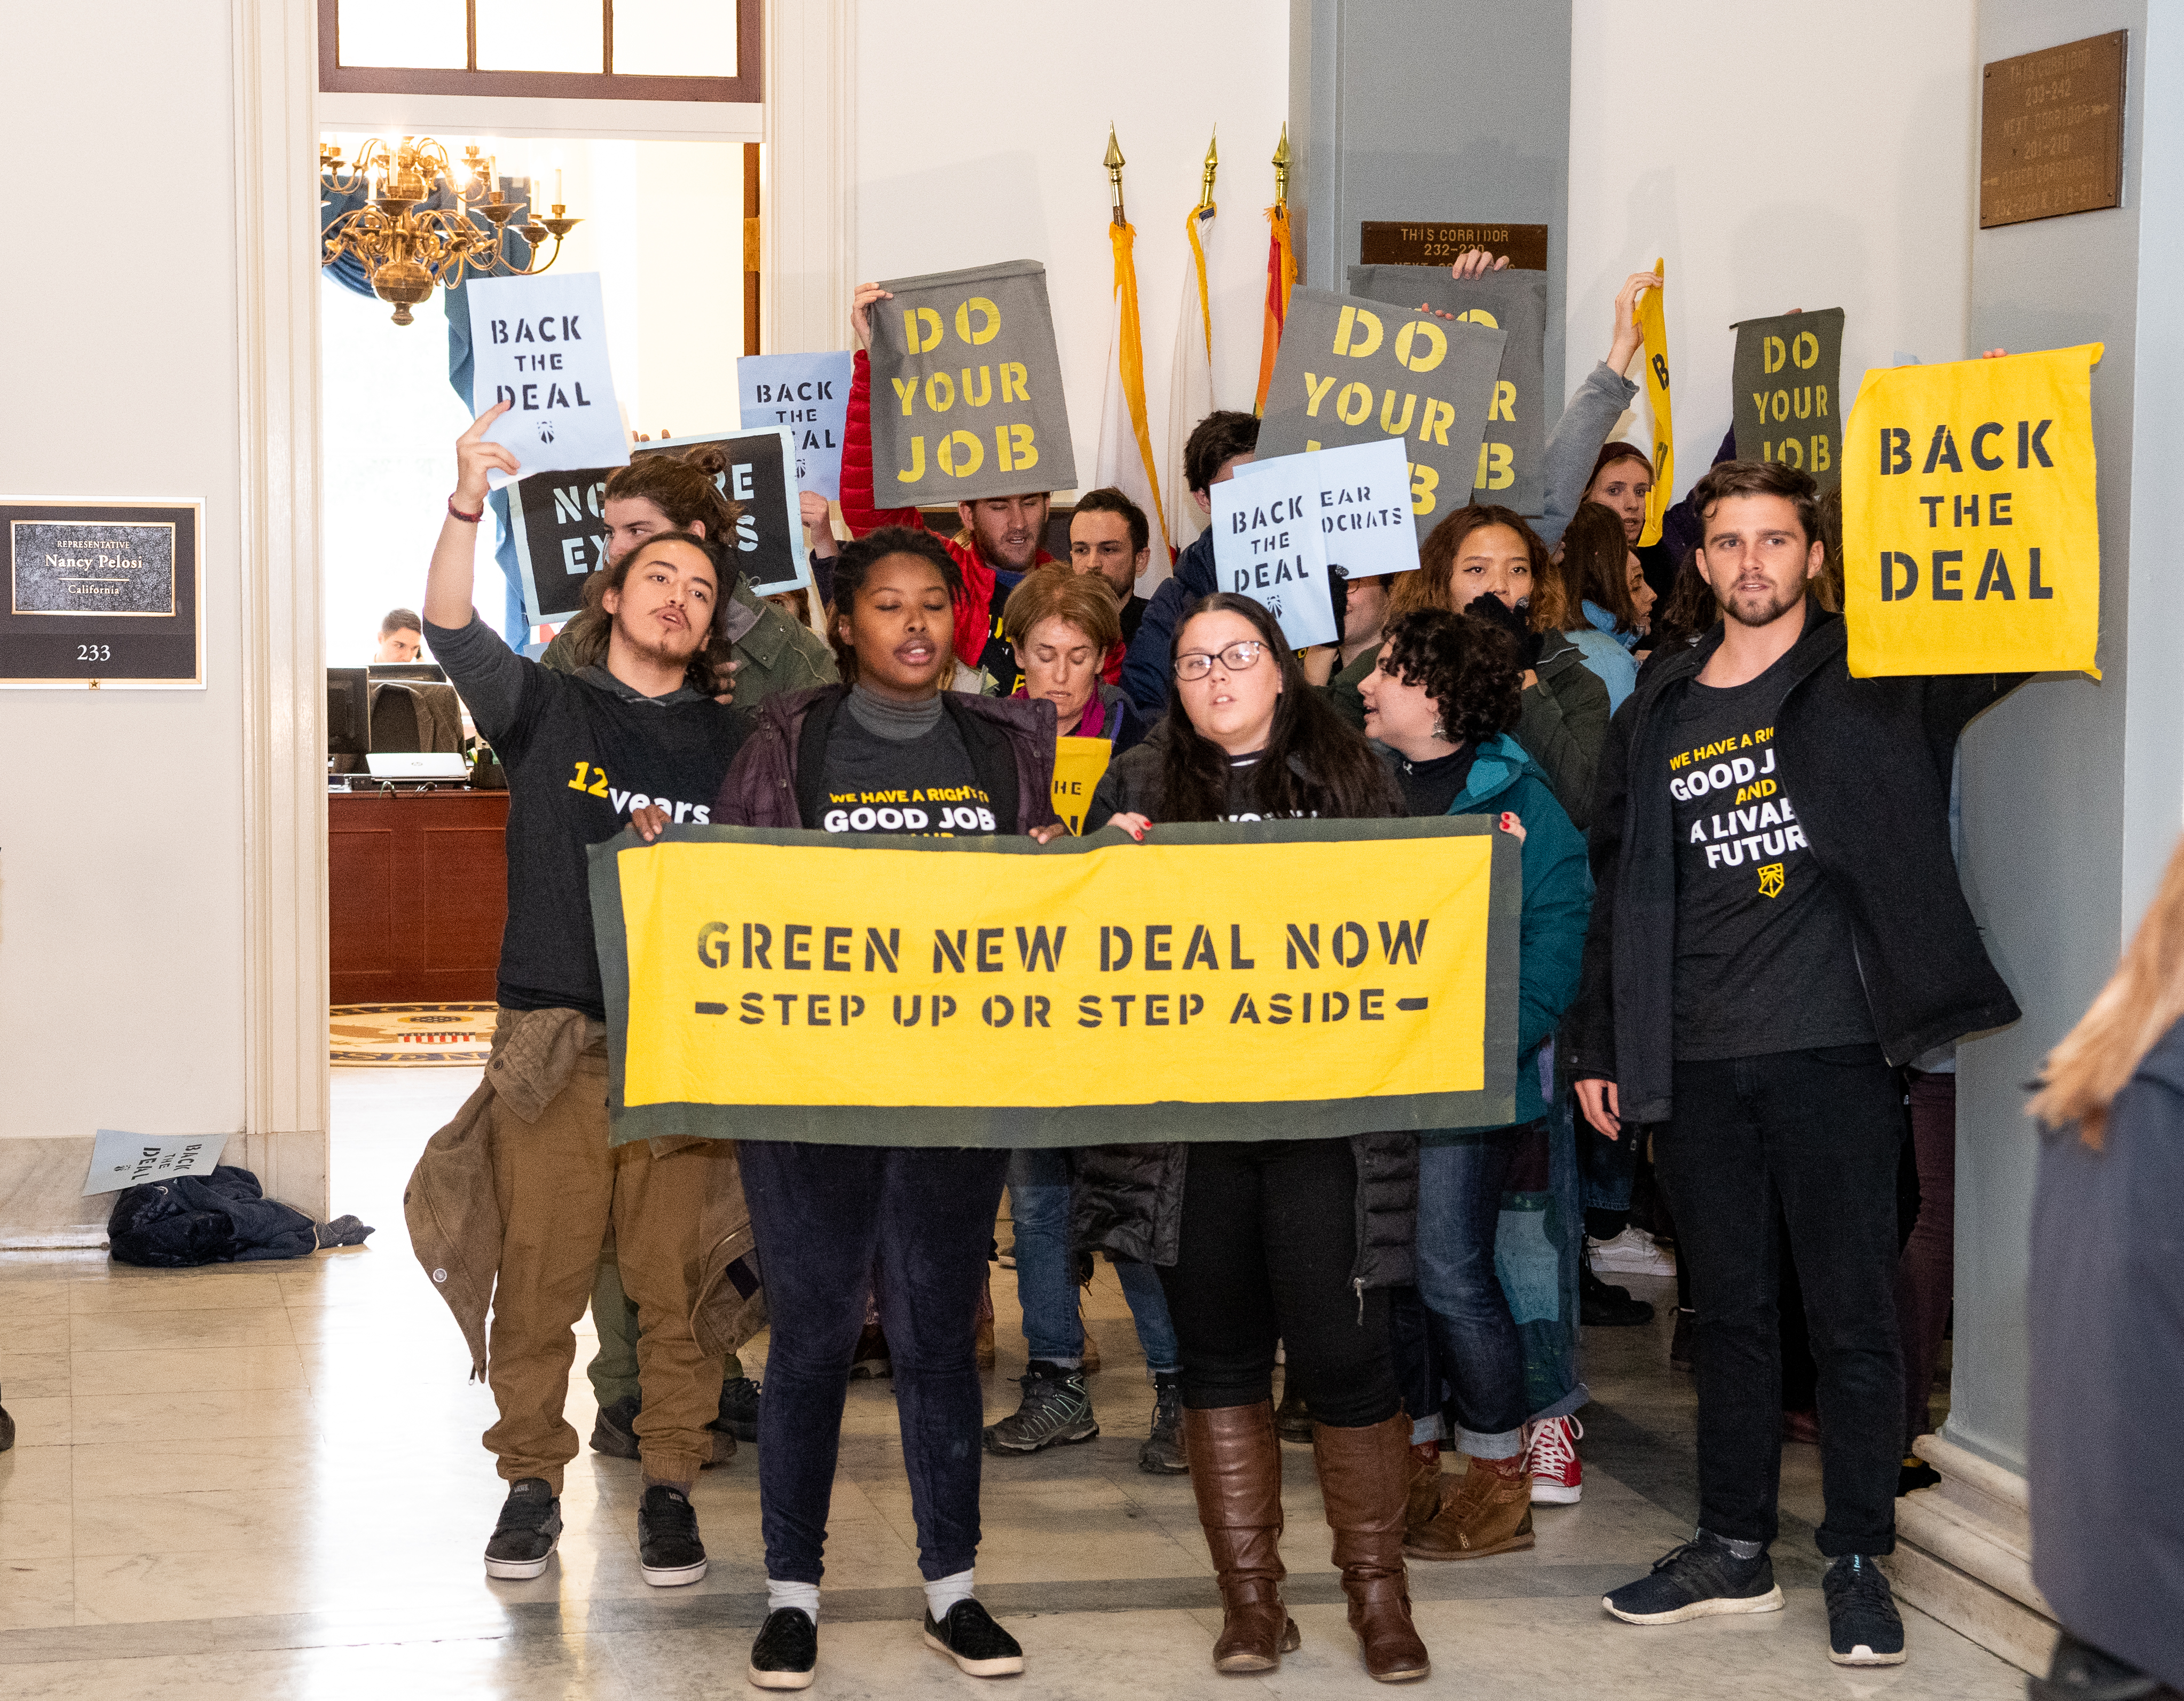 Protesters seen holding placards during the Sunrise Movement protest inside the office of US Representative Nancy Pelosi (D-CA) to advocate that Democrats support the Green New Deal, at the US Capitol in Washington, DC.